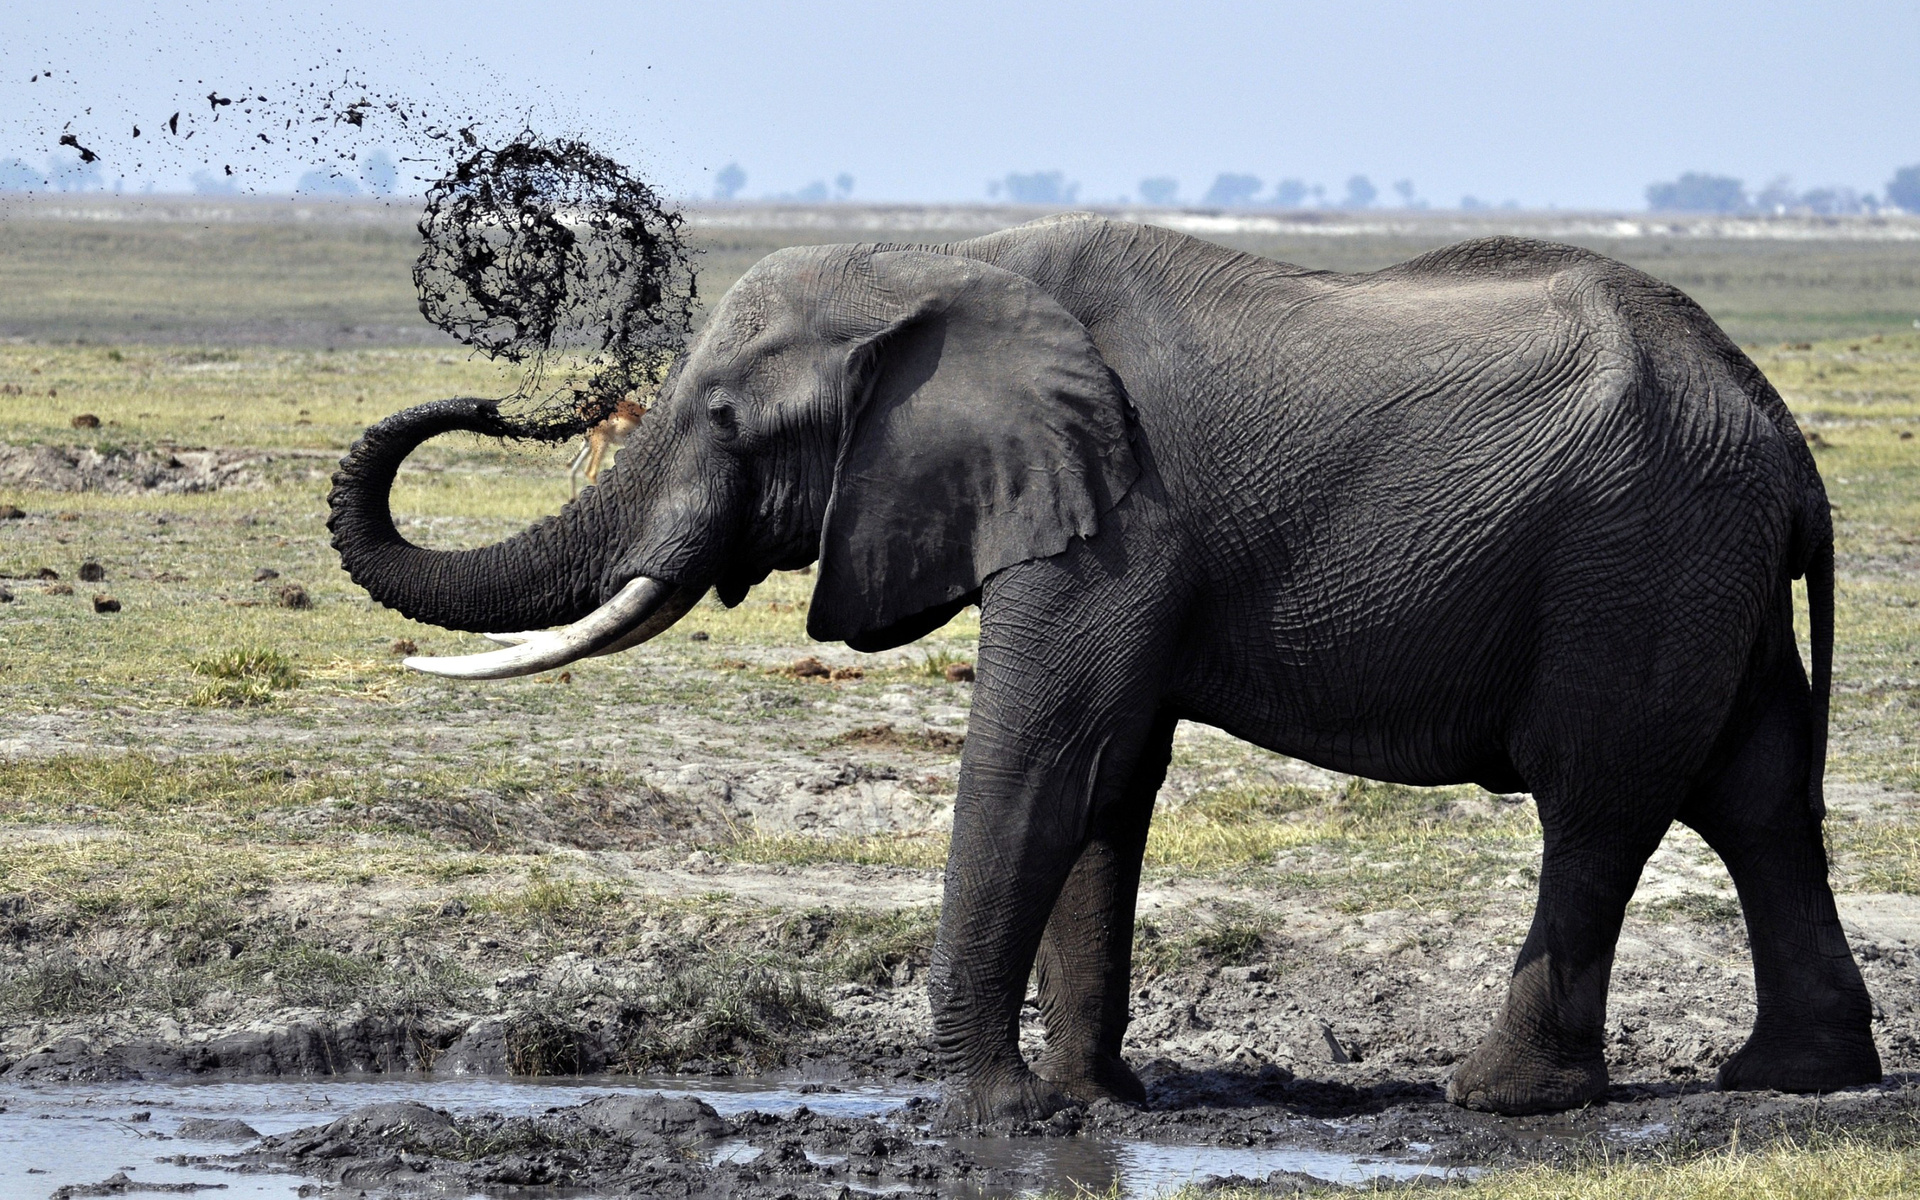 elephants, Animals, Wildlife, Africa, Mud, Water, Puddle, Landscapes, Grass, Fields, Sky Wallpaper